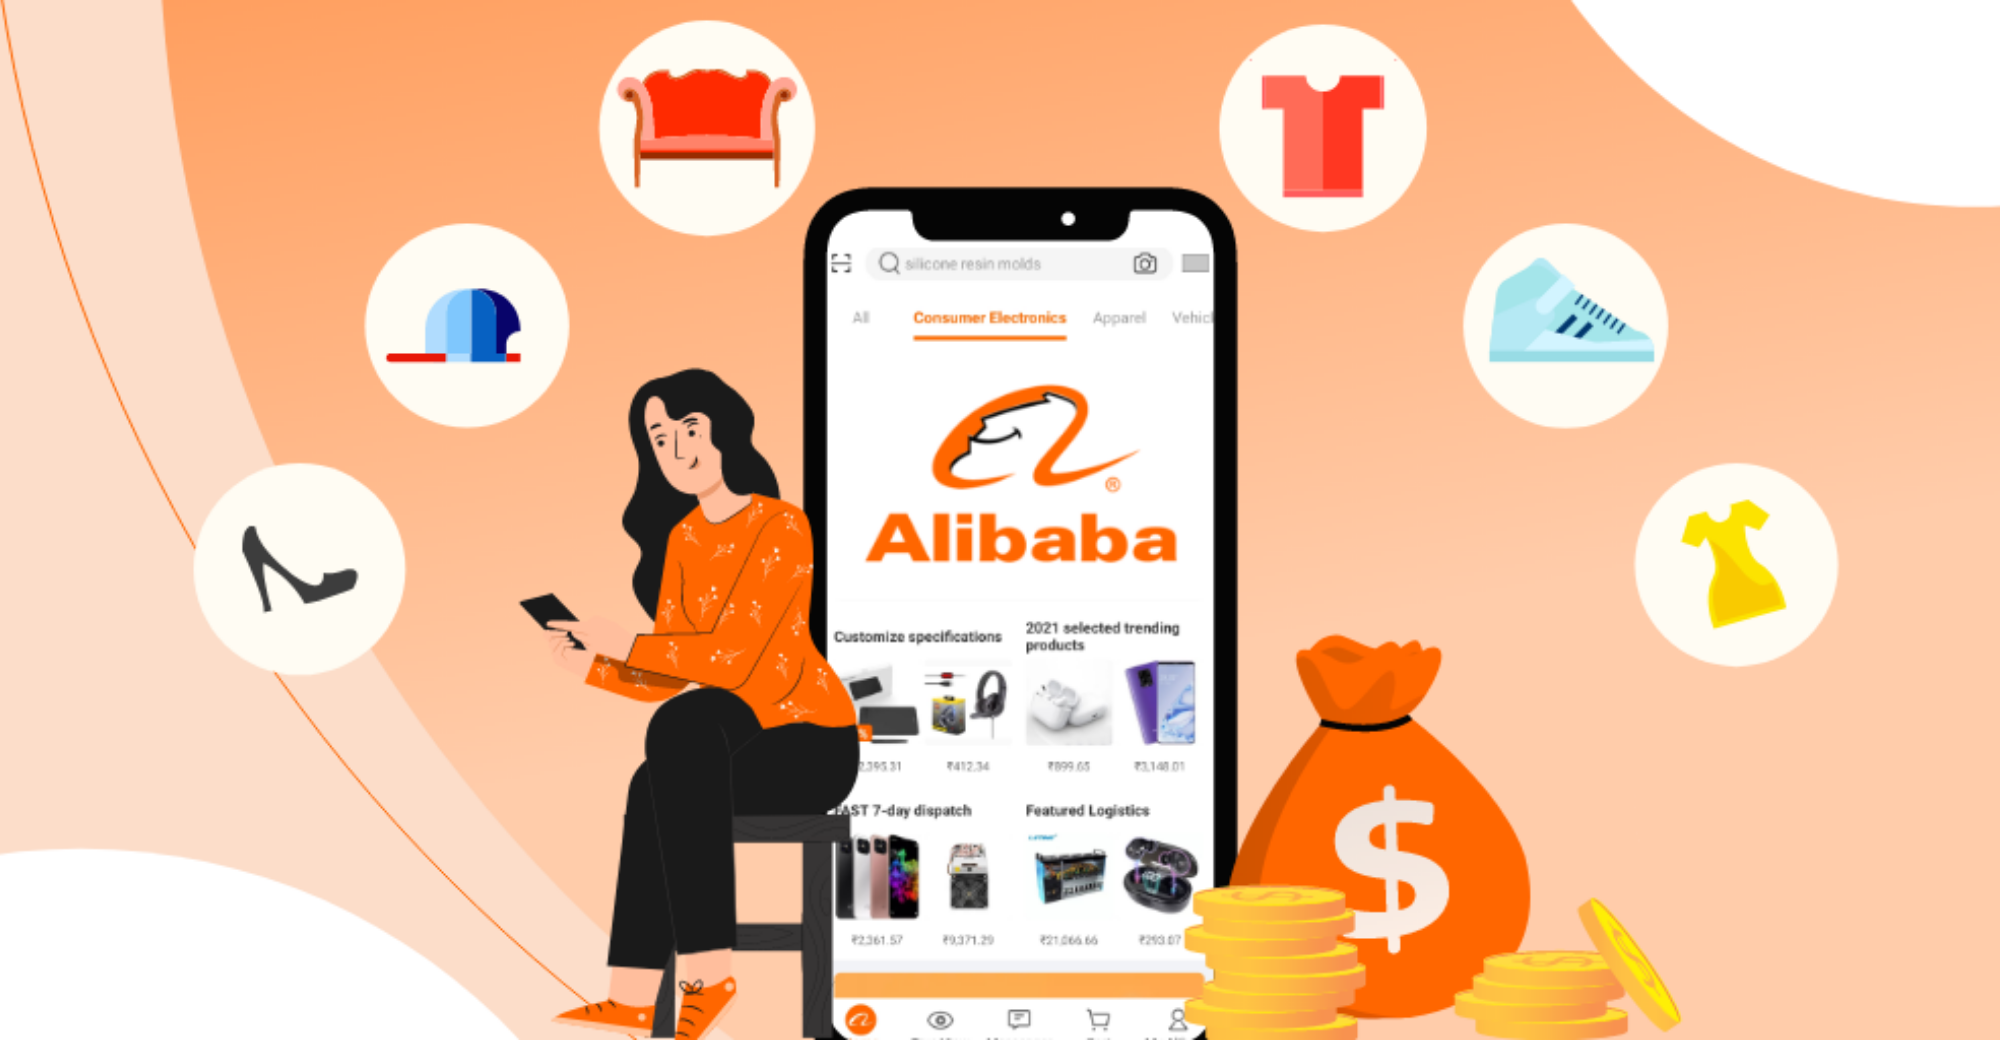 Alibaba Fully Connects Online Marketplaces Taobao and Tmall, Establishing "China Digital Business Sector" - Pandaily